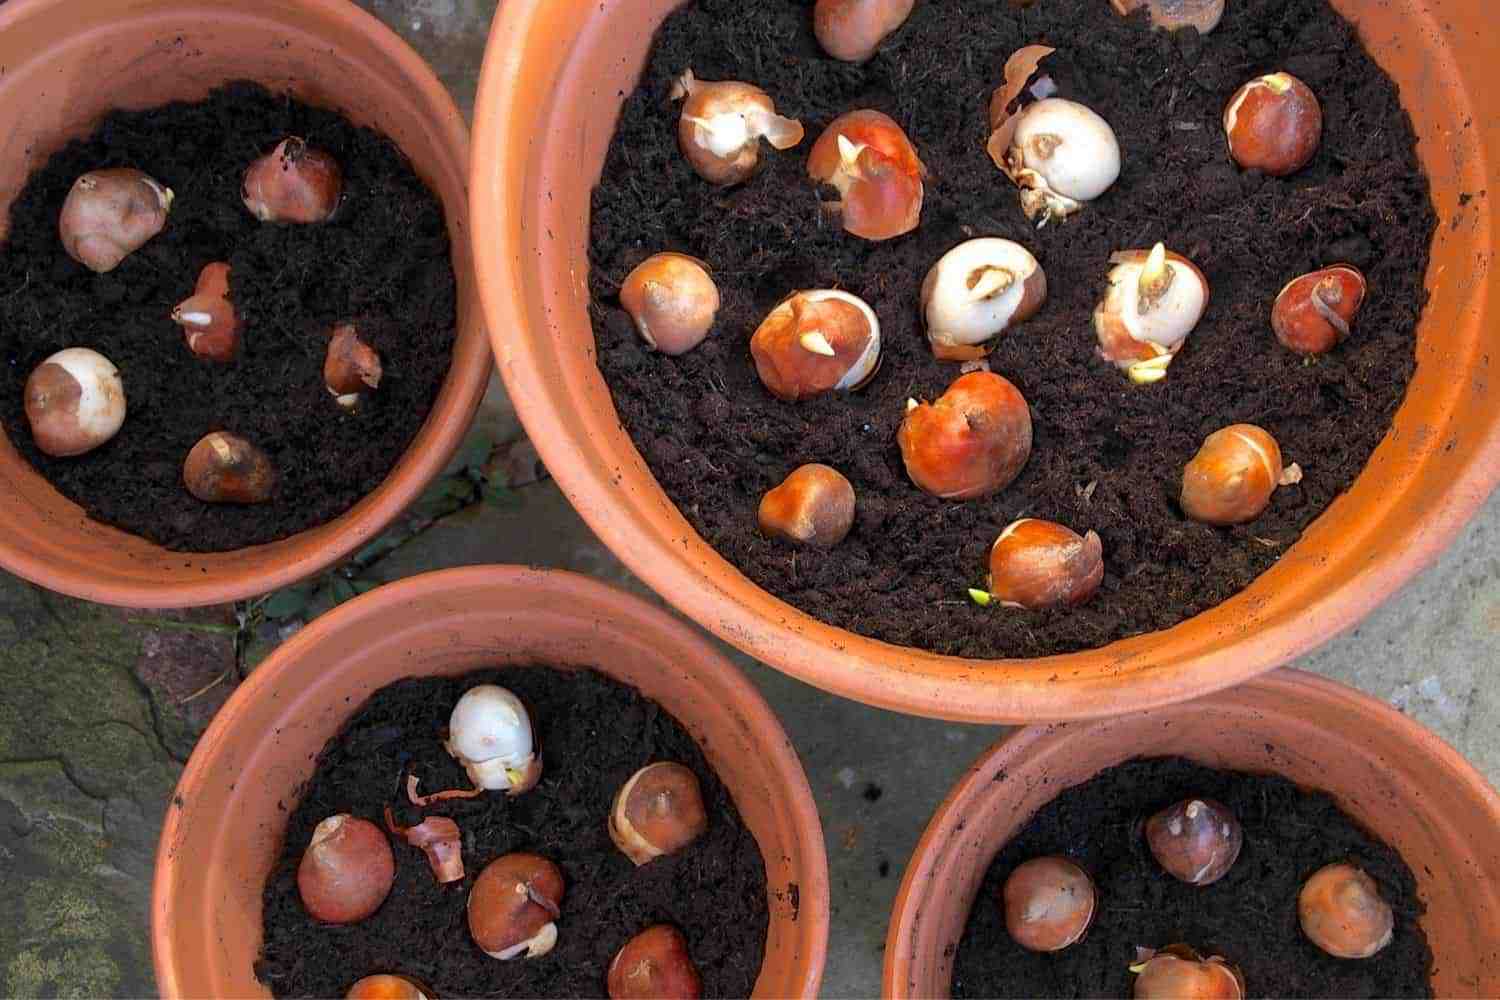 How to plant tulip bulbs in pots